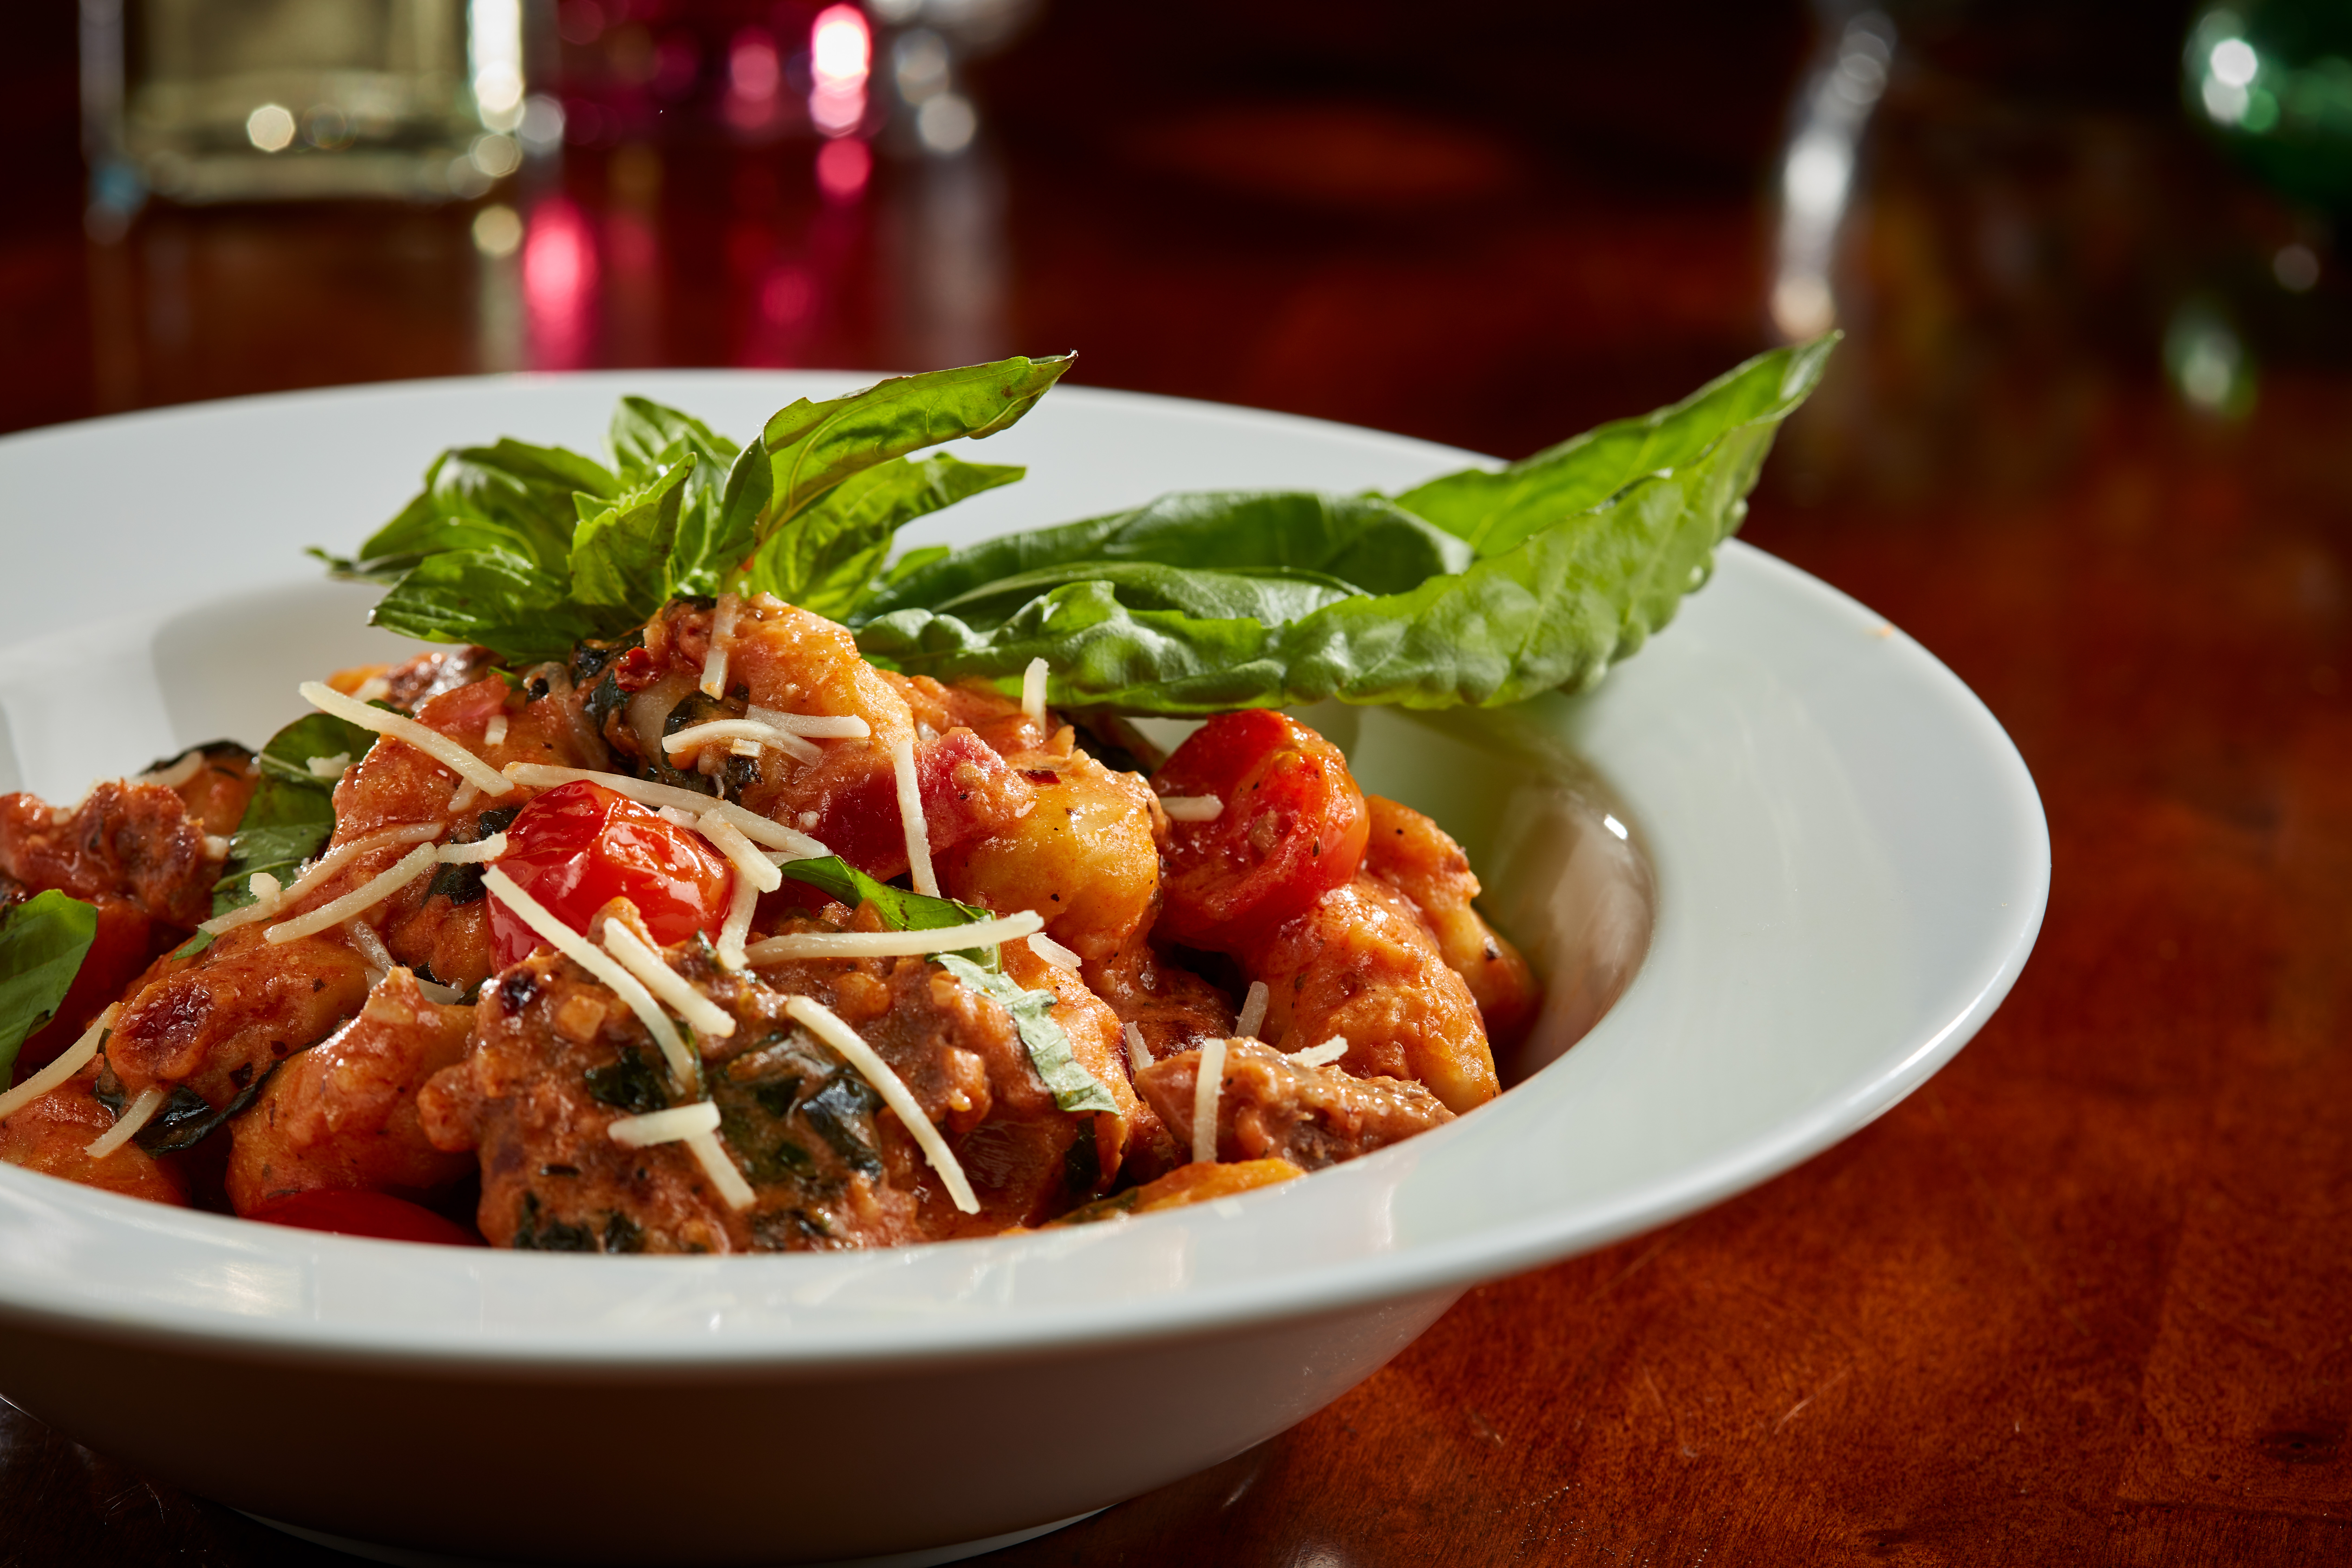 Maplewood Meats Italian Sausage, cherry tomatoes, and fresh basil tossed in a tomato-vodka sauce topped with shredded Parmesan cheese. $16.99